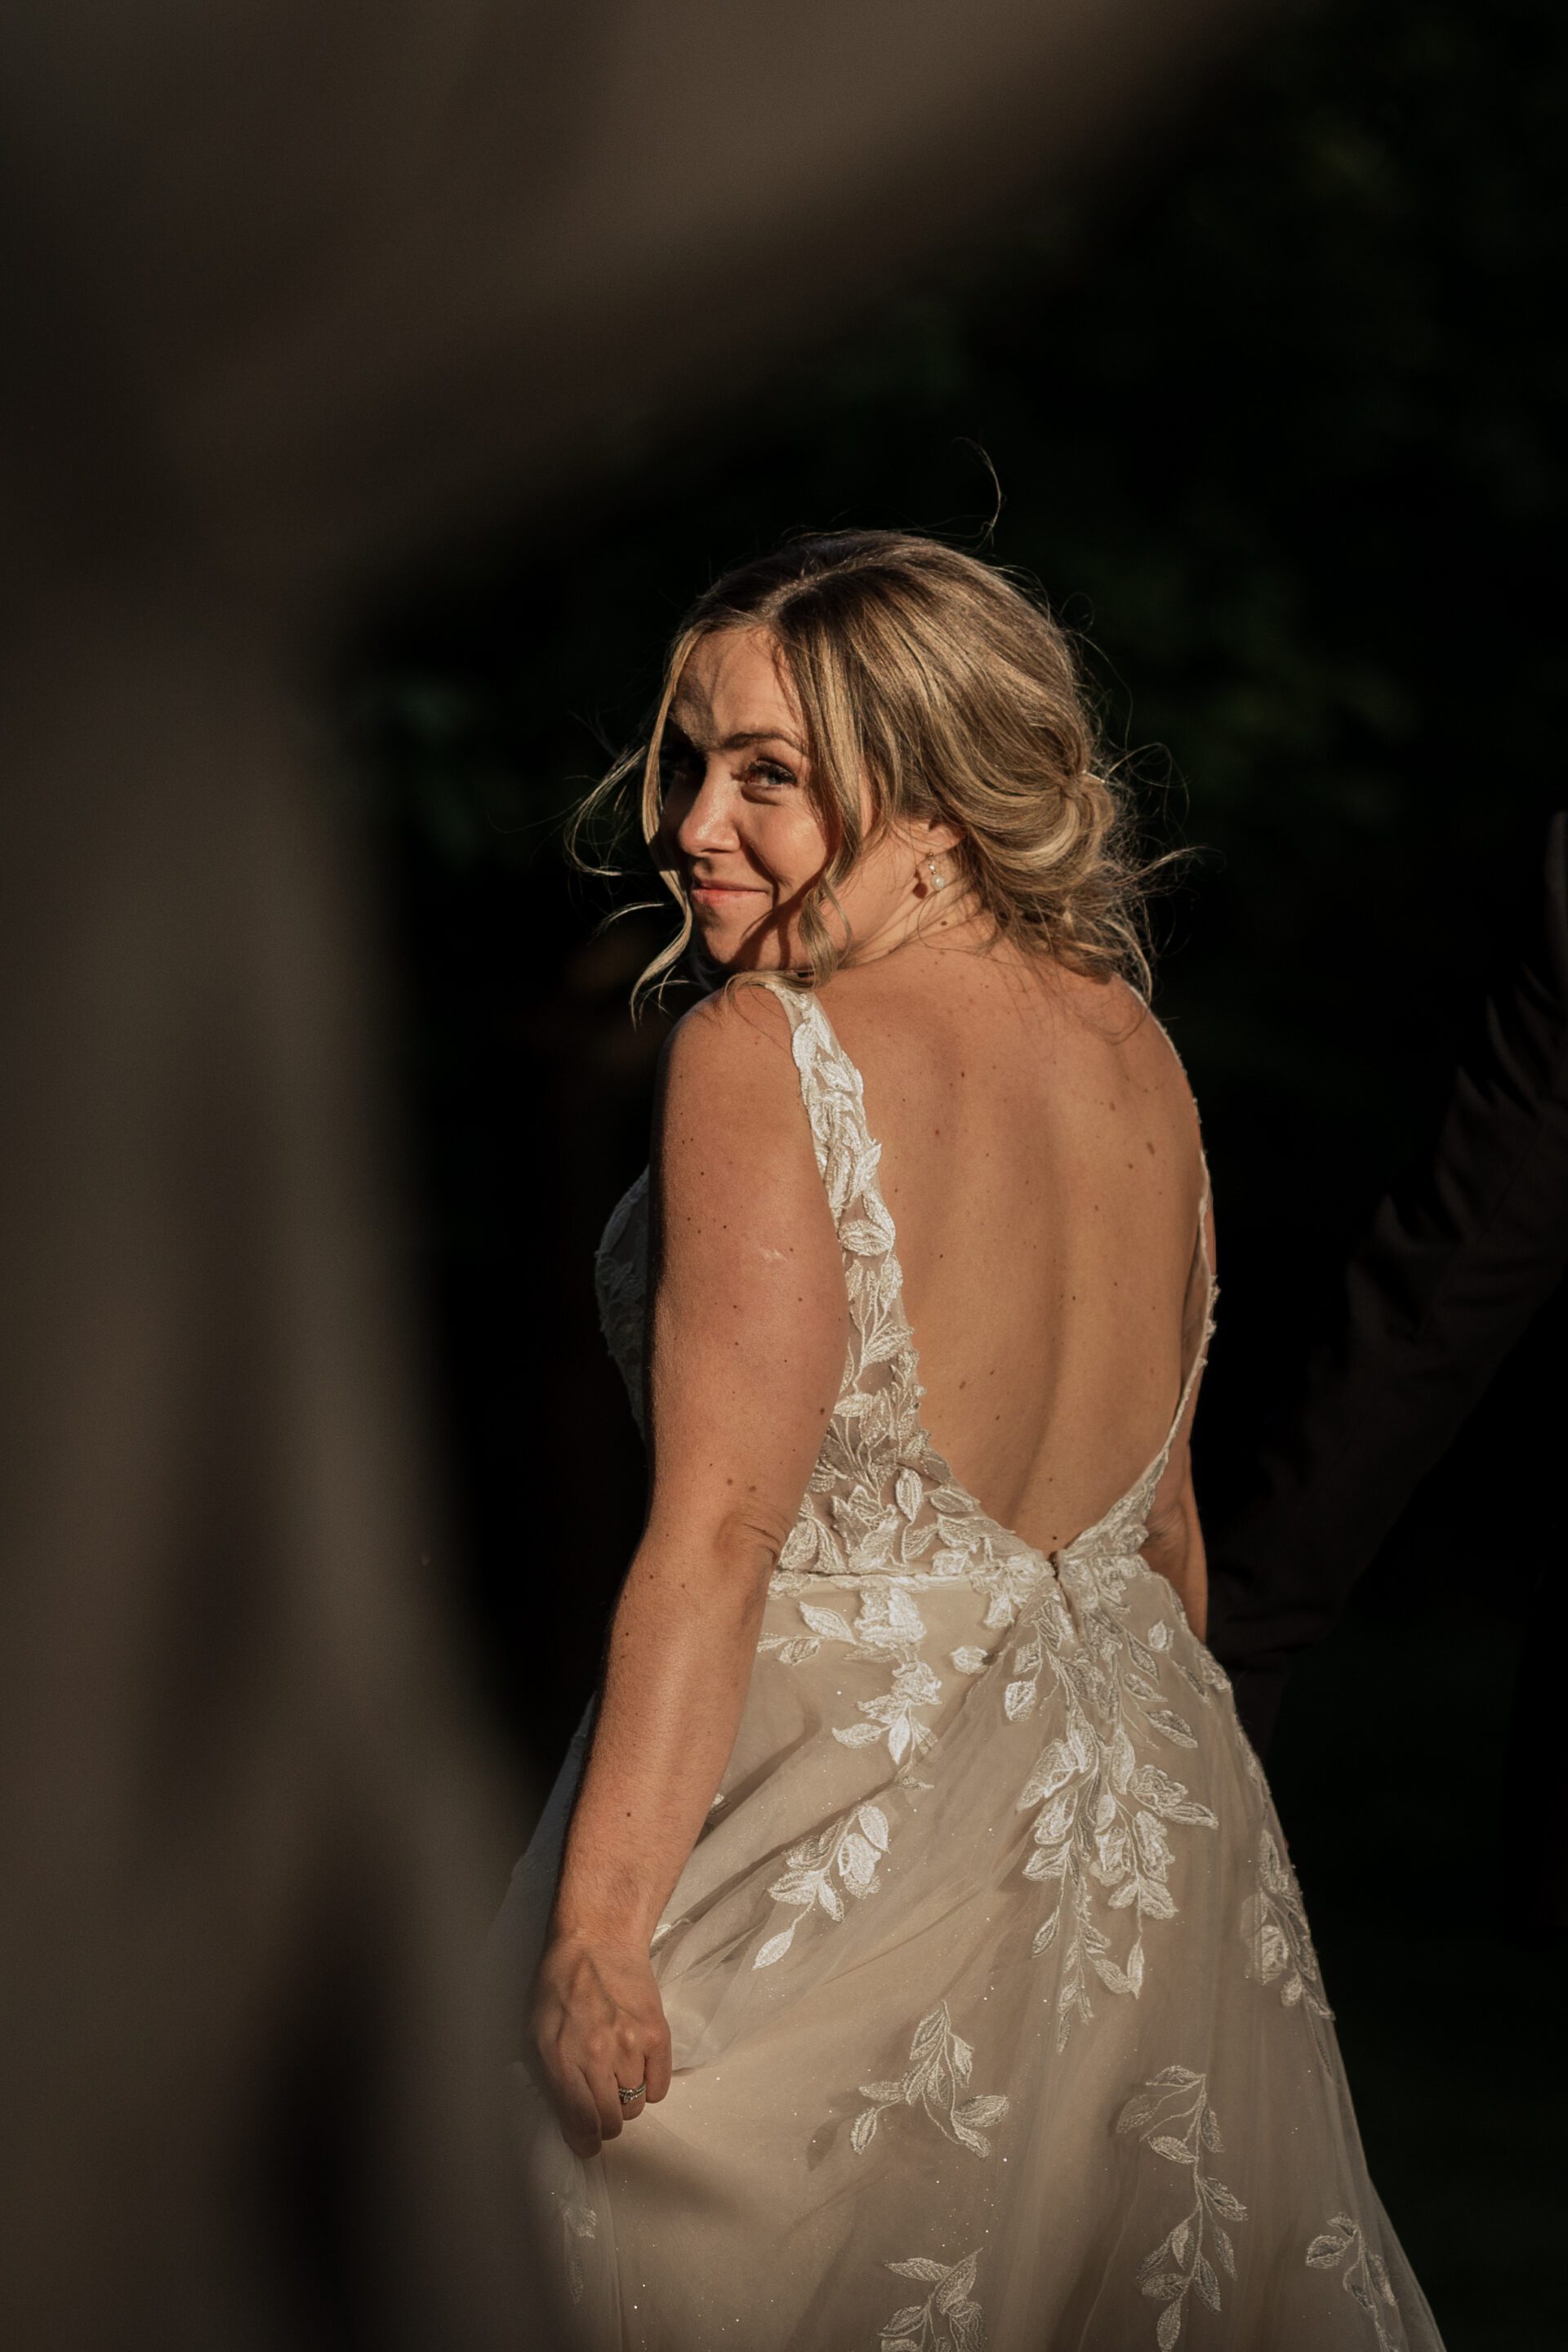 The bride captured in a patch of light during golden hour couple portraits